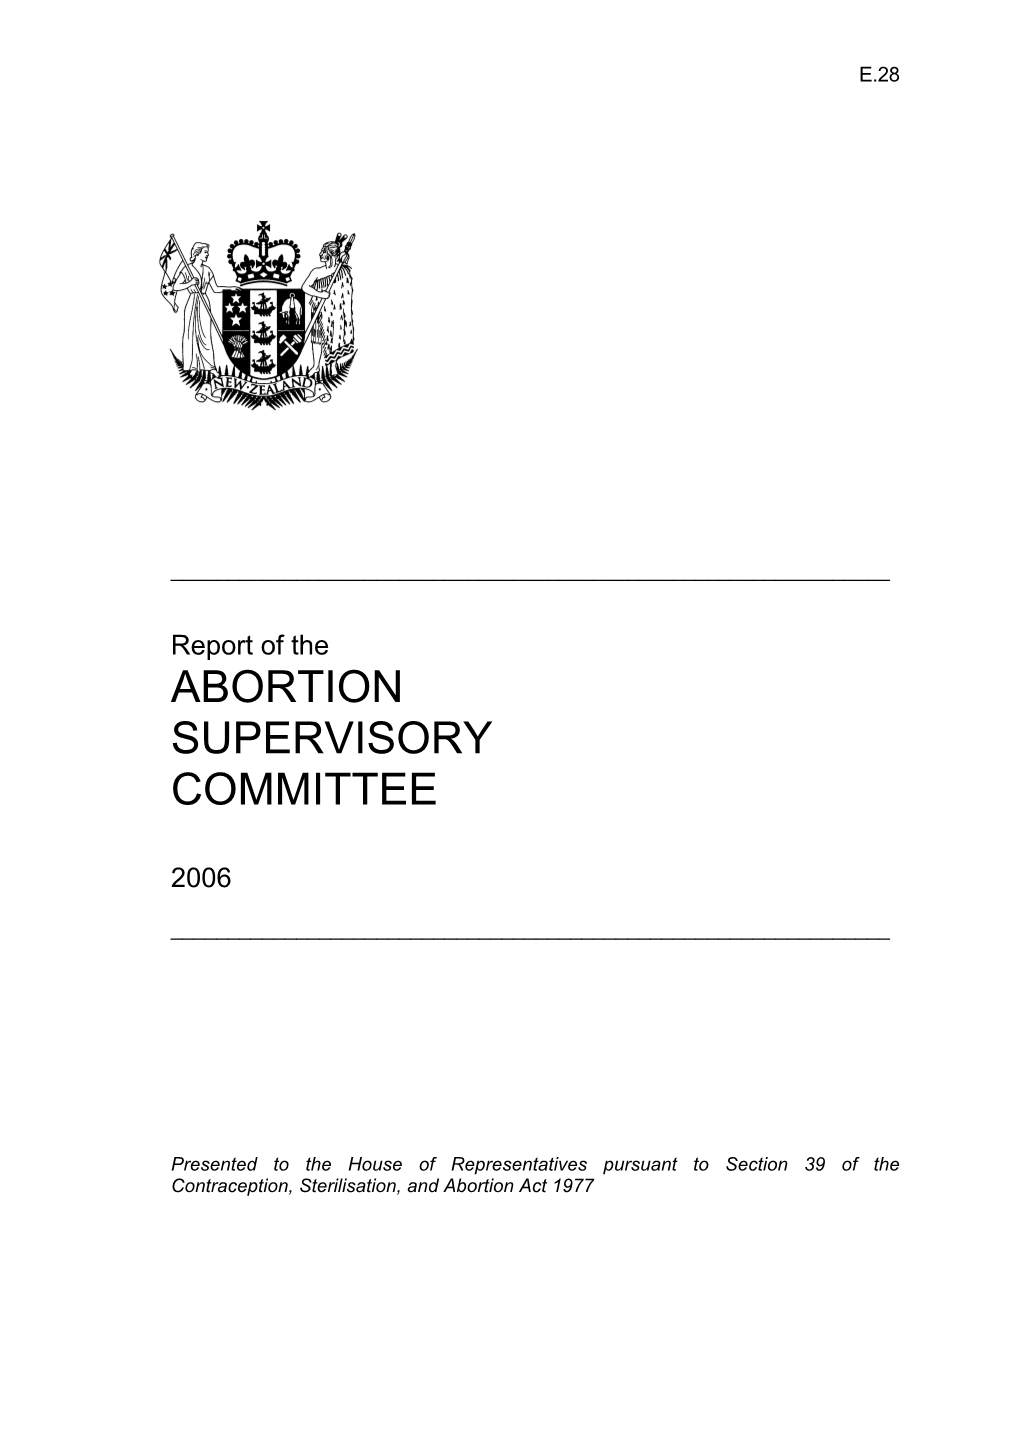 Abortion Supervisory Committee